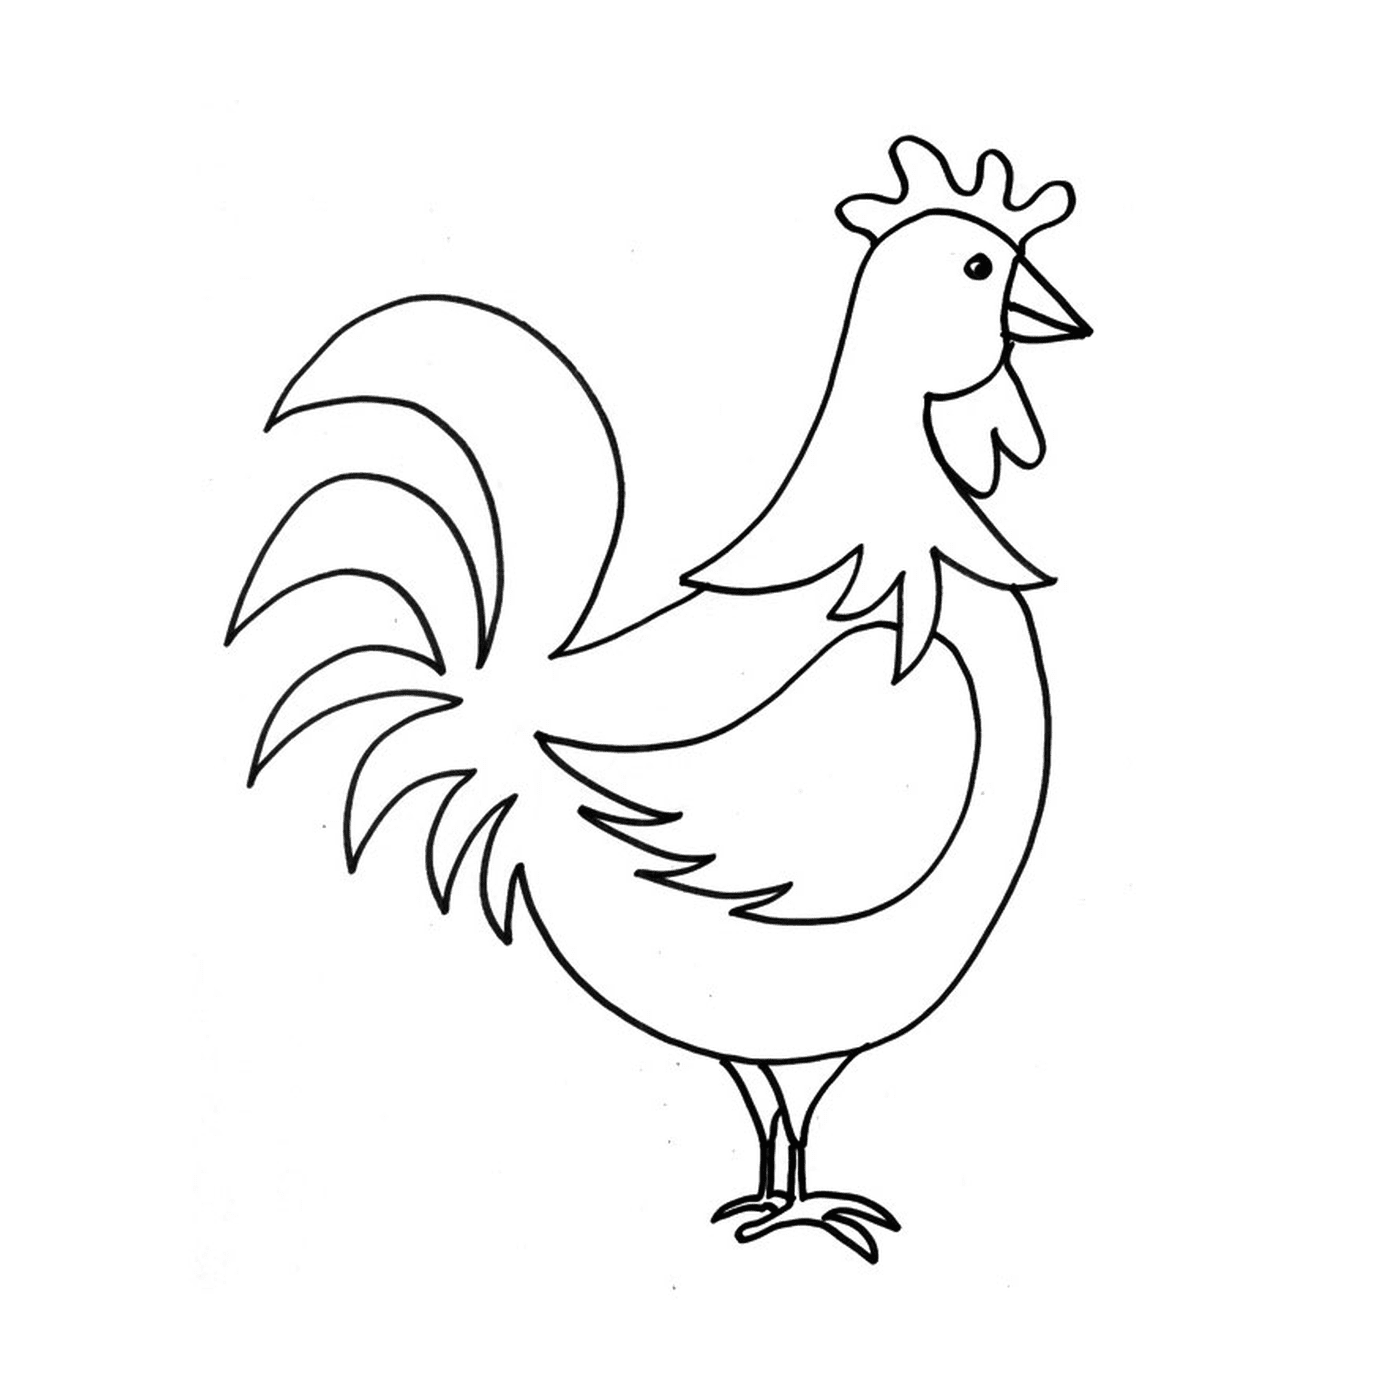  A rooster 